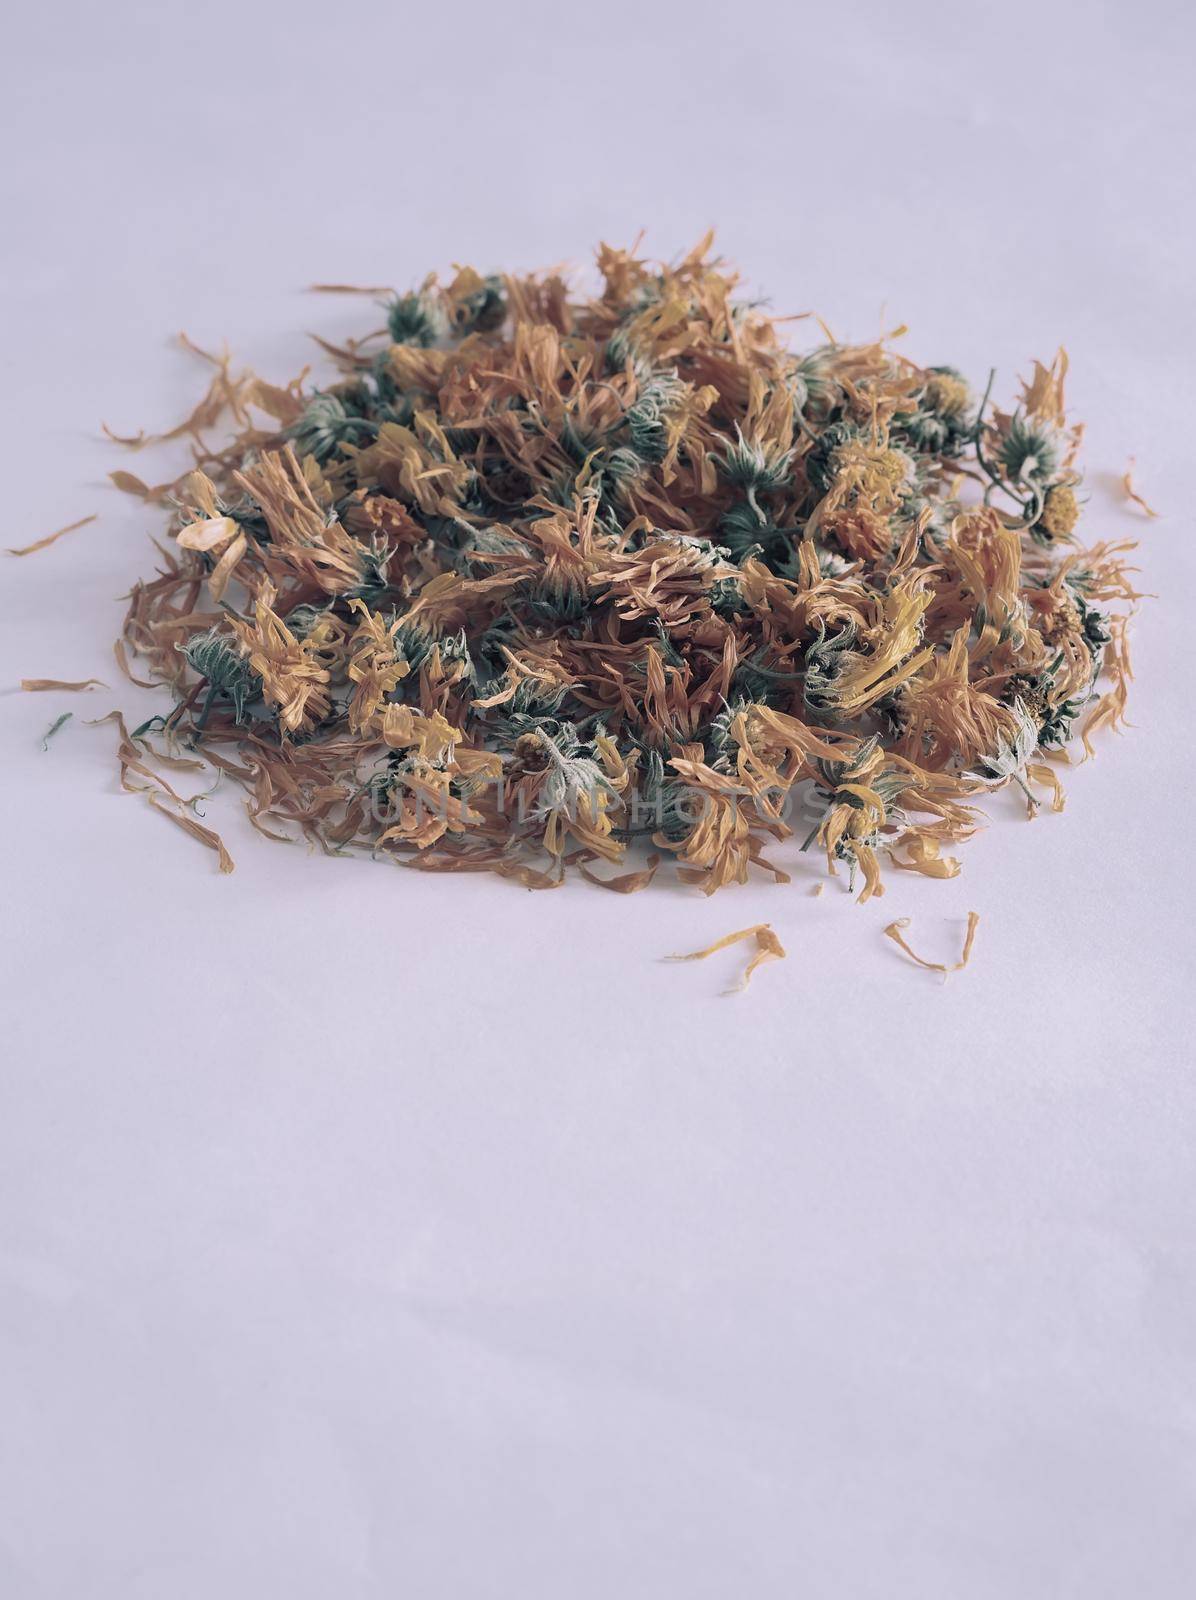 Dried calendula flowers on a light background, a drug with a bactericidal, anti-inflammatory effect. Copy space.